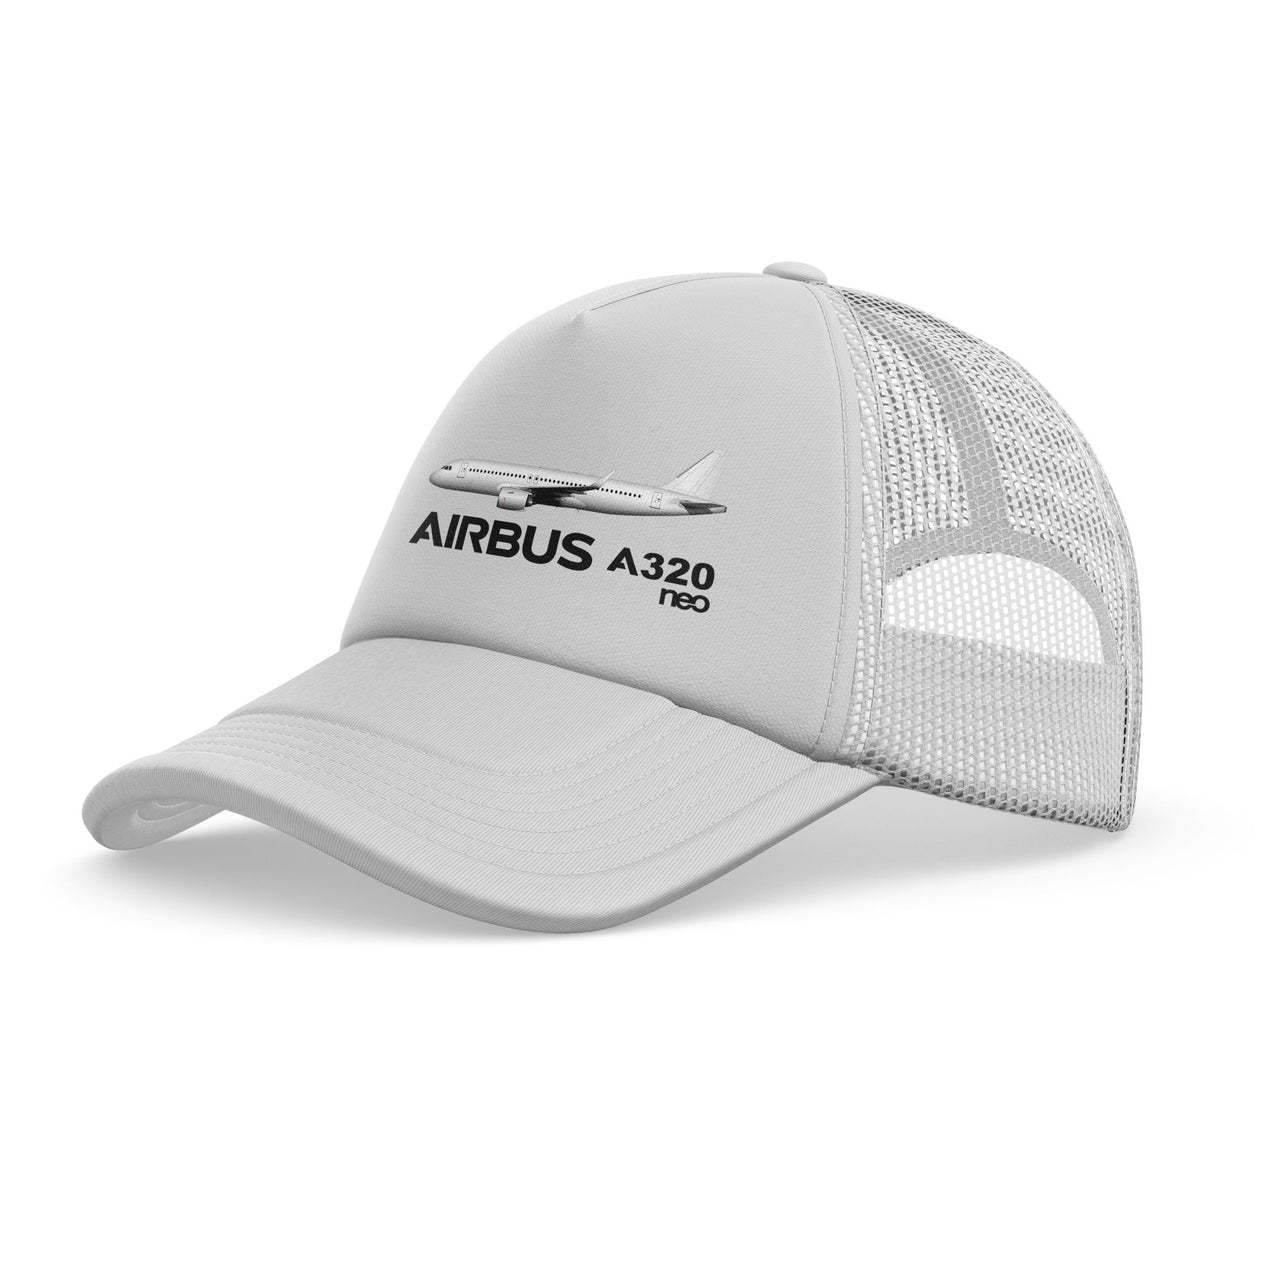 The Airbus A320Neo Designed Trucker Caps & Hats